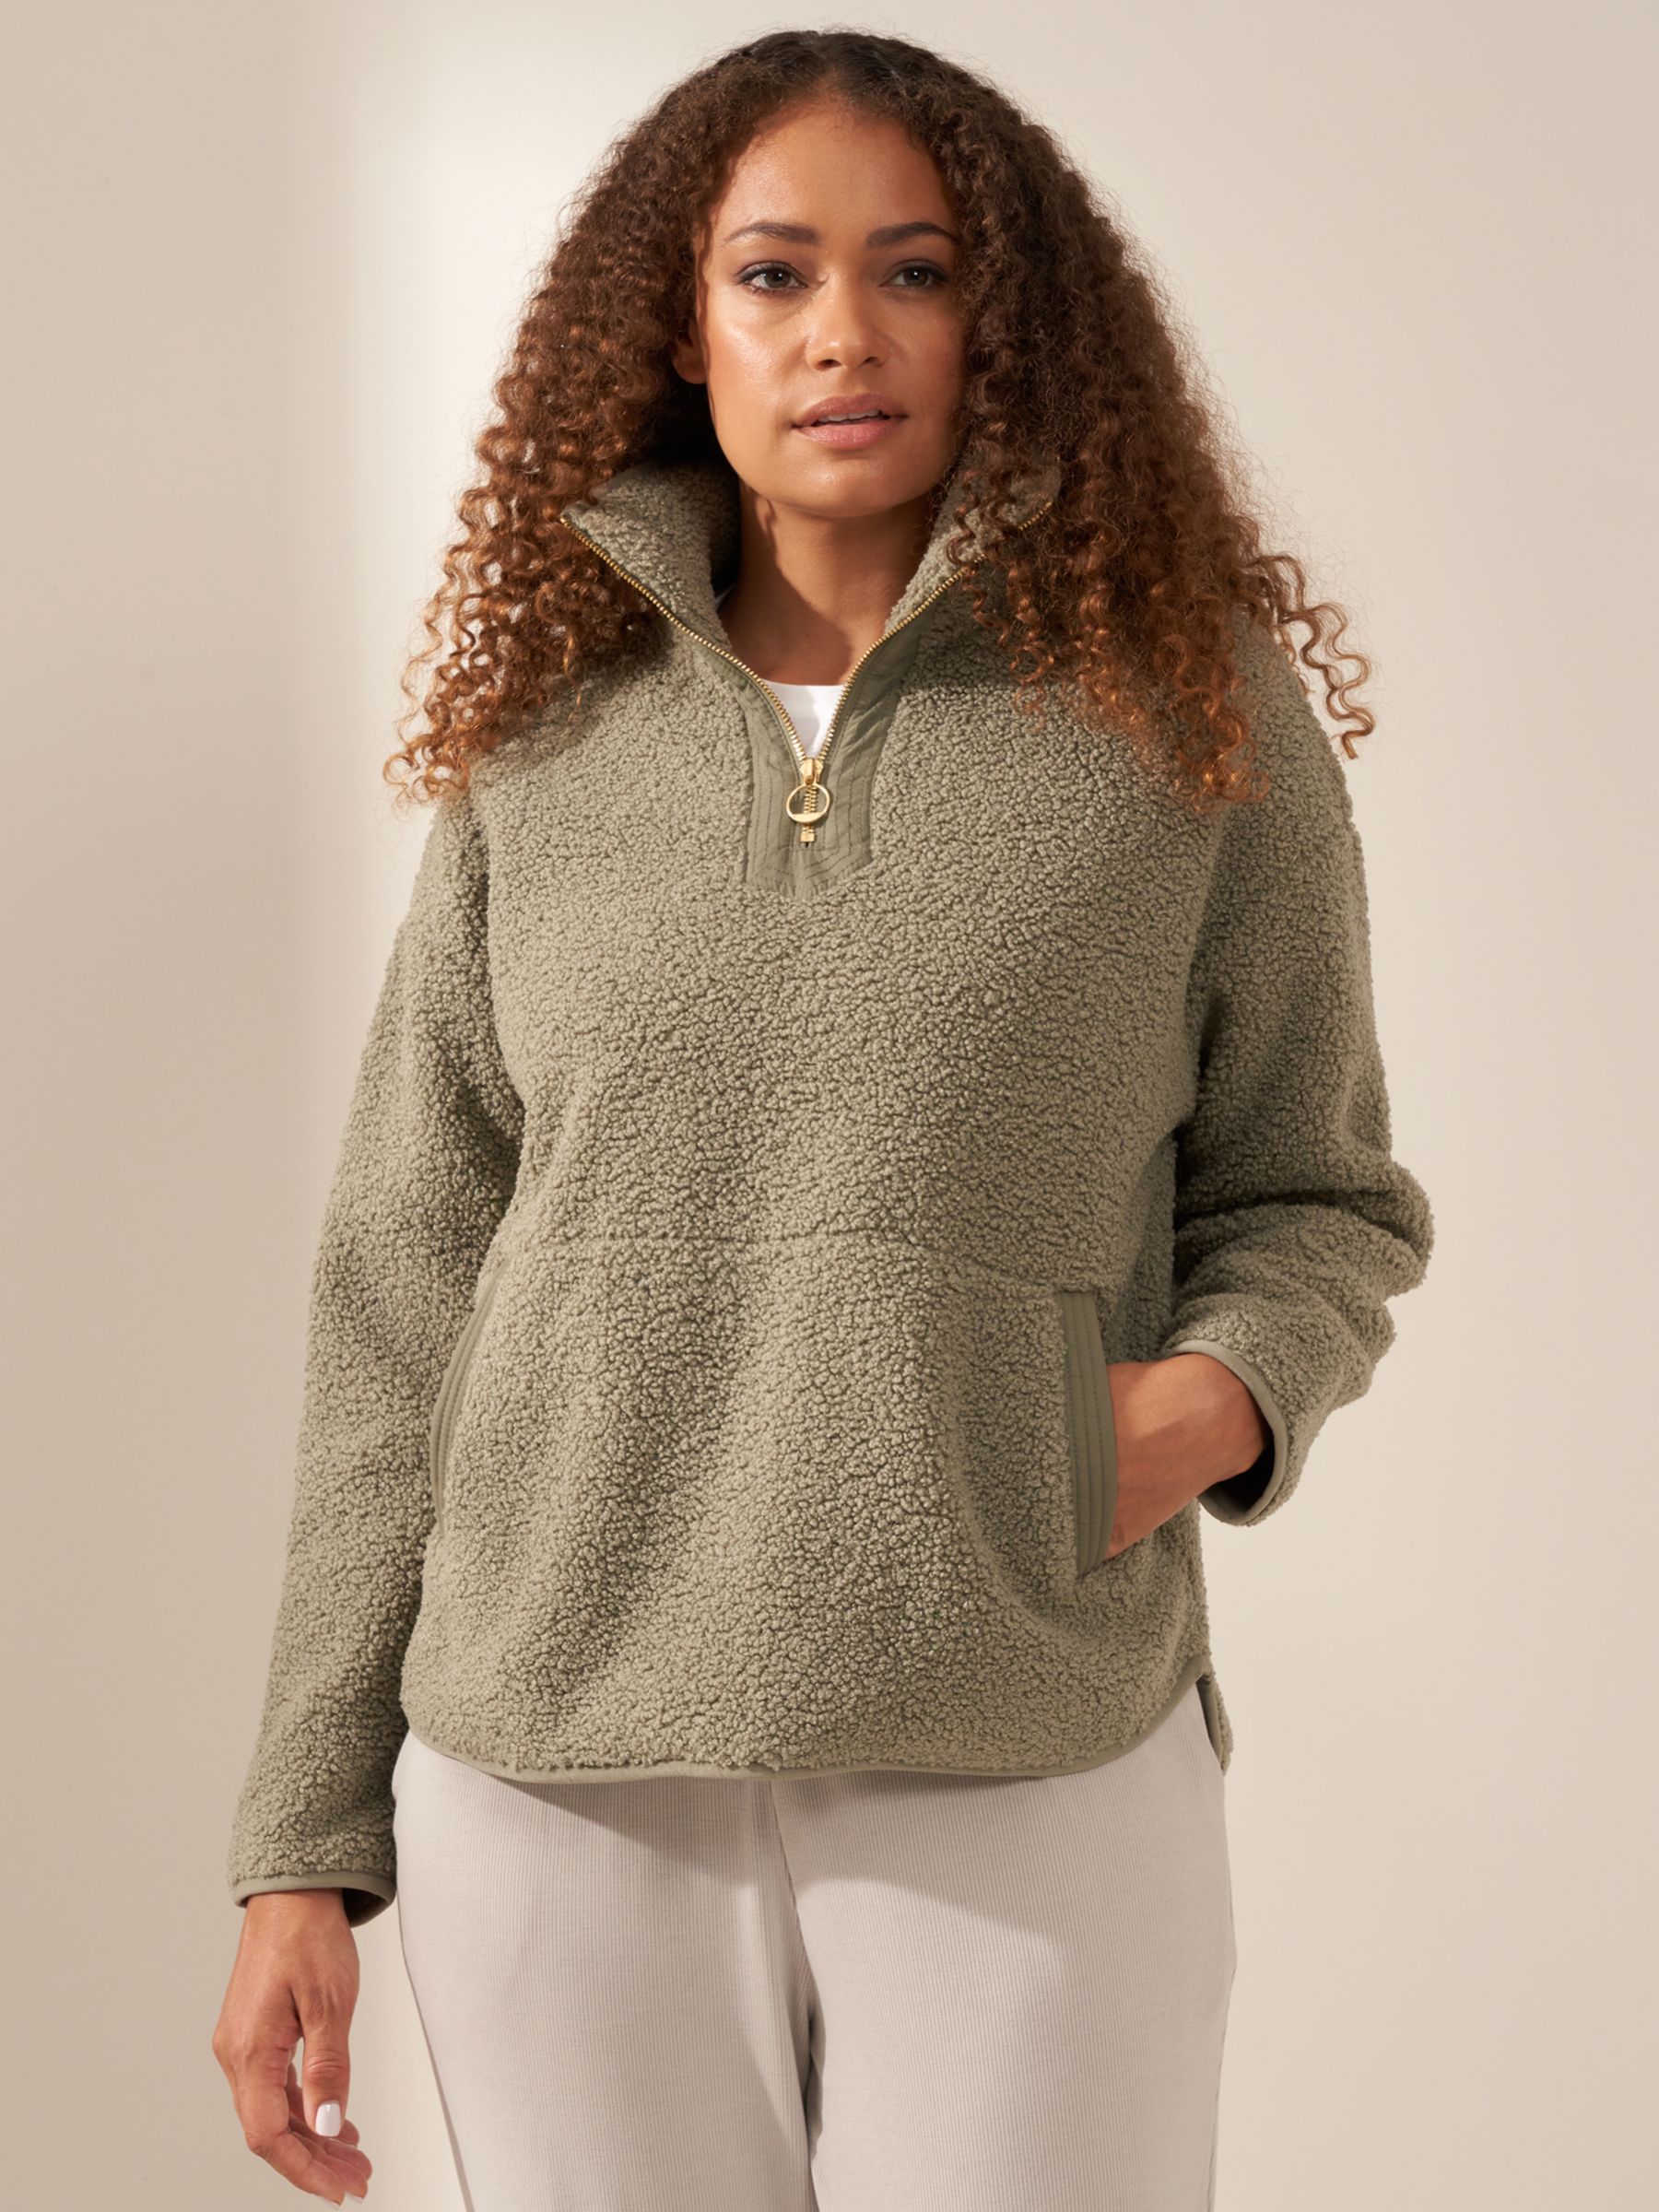 Women's Fleece Featured Story  Warmth For Everyone-UNIQLO OFFICIAL ONLINE  FLAGSHIP STORE